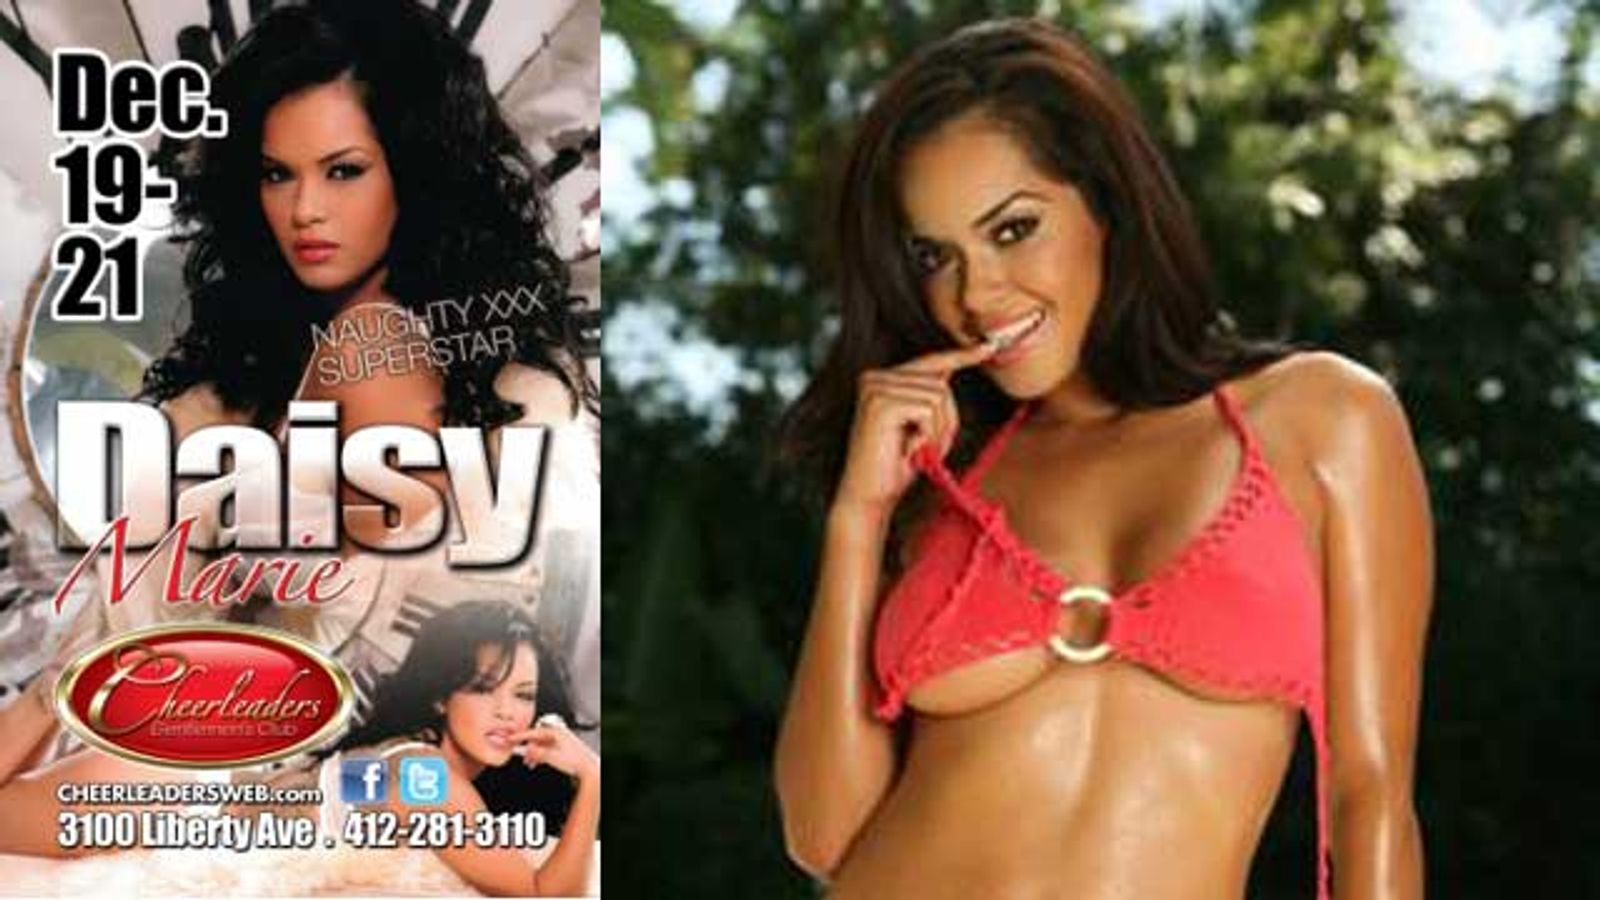 Daisy Marie Feature Dancing Specially for the Holidays Dec. 19-21